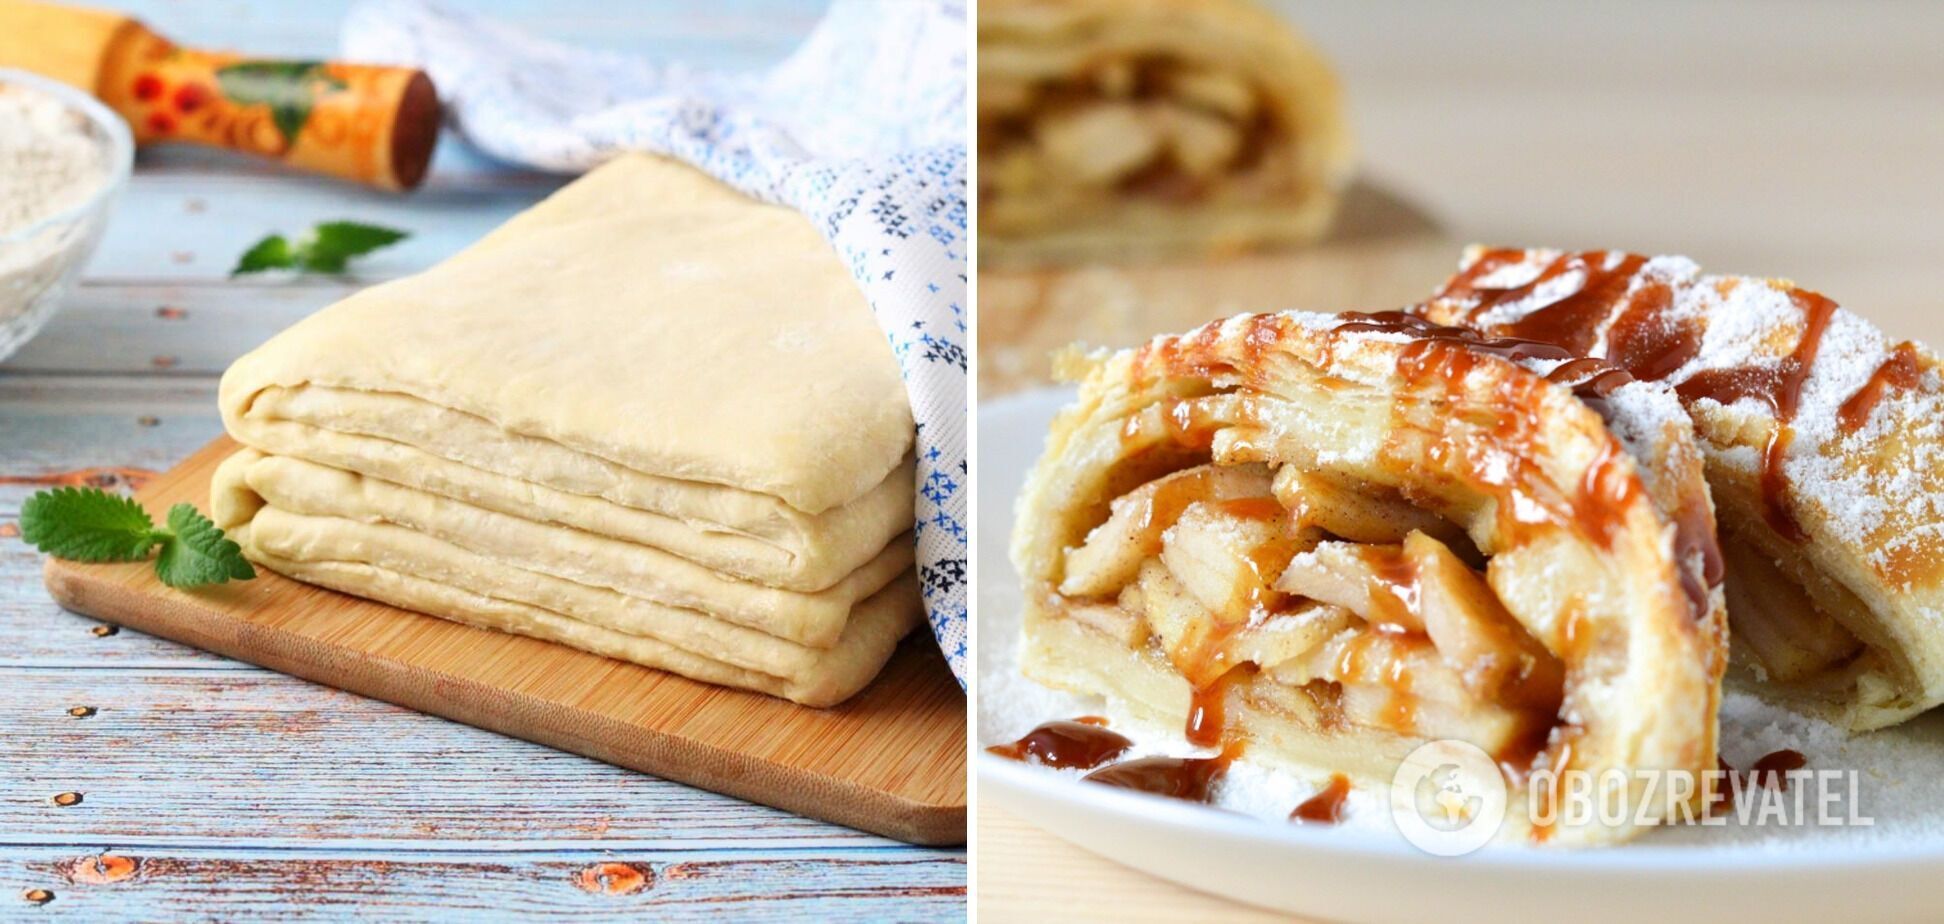 What to cook with puff pastry